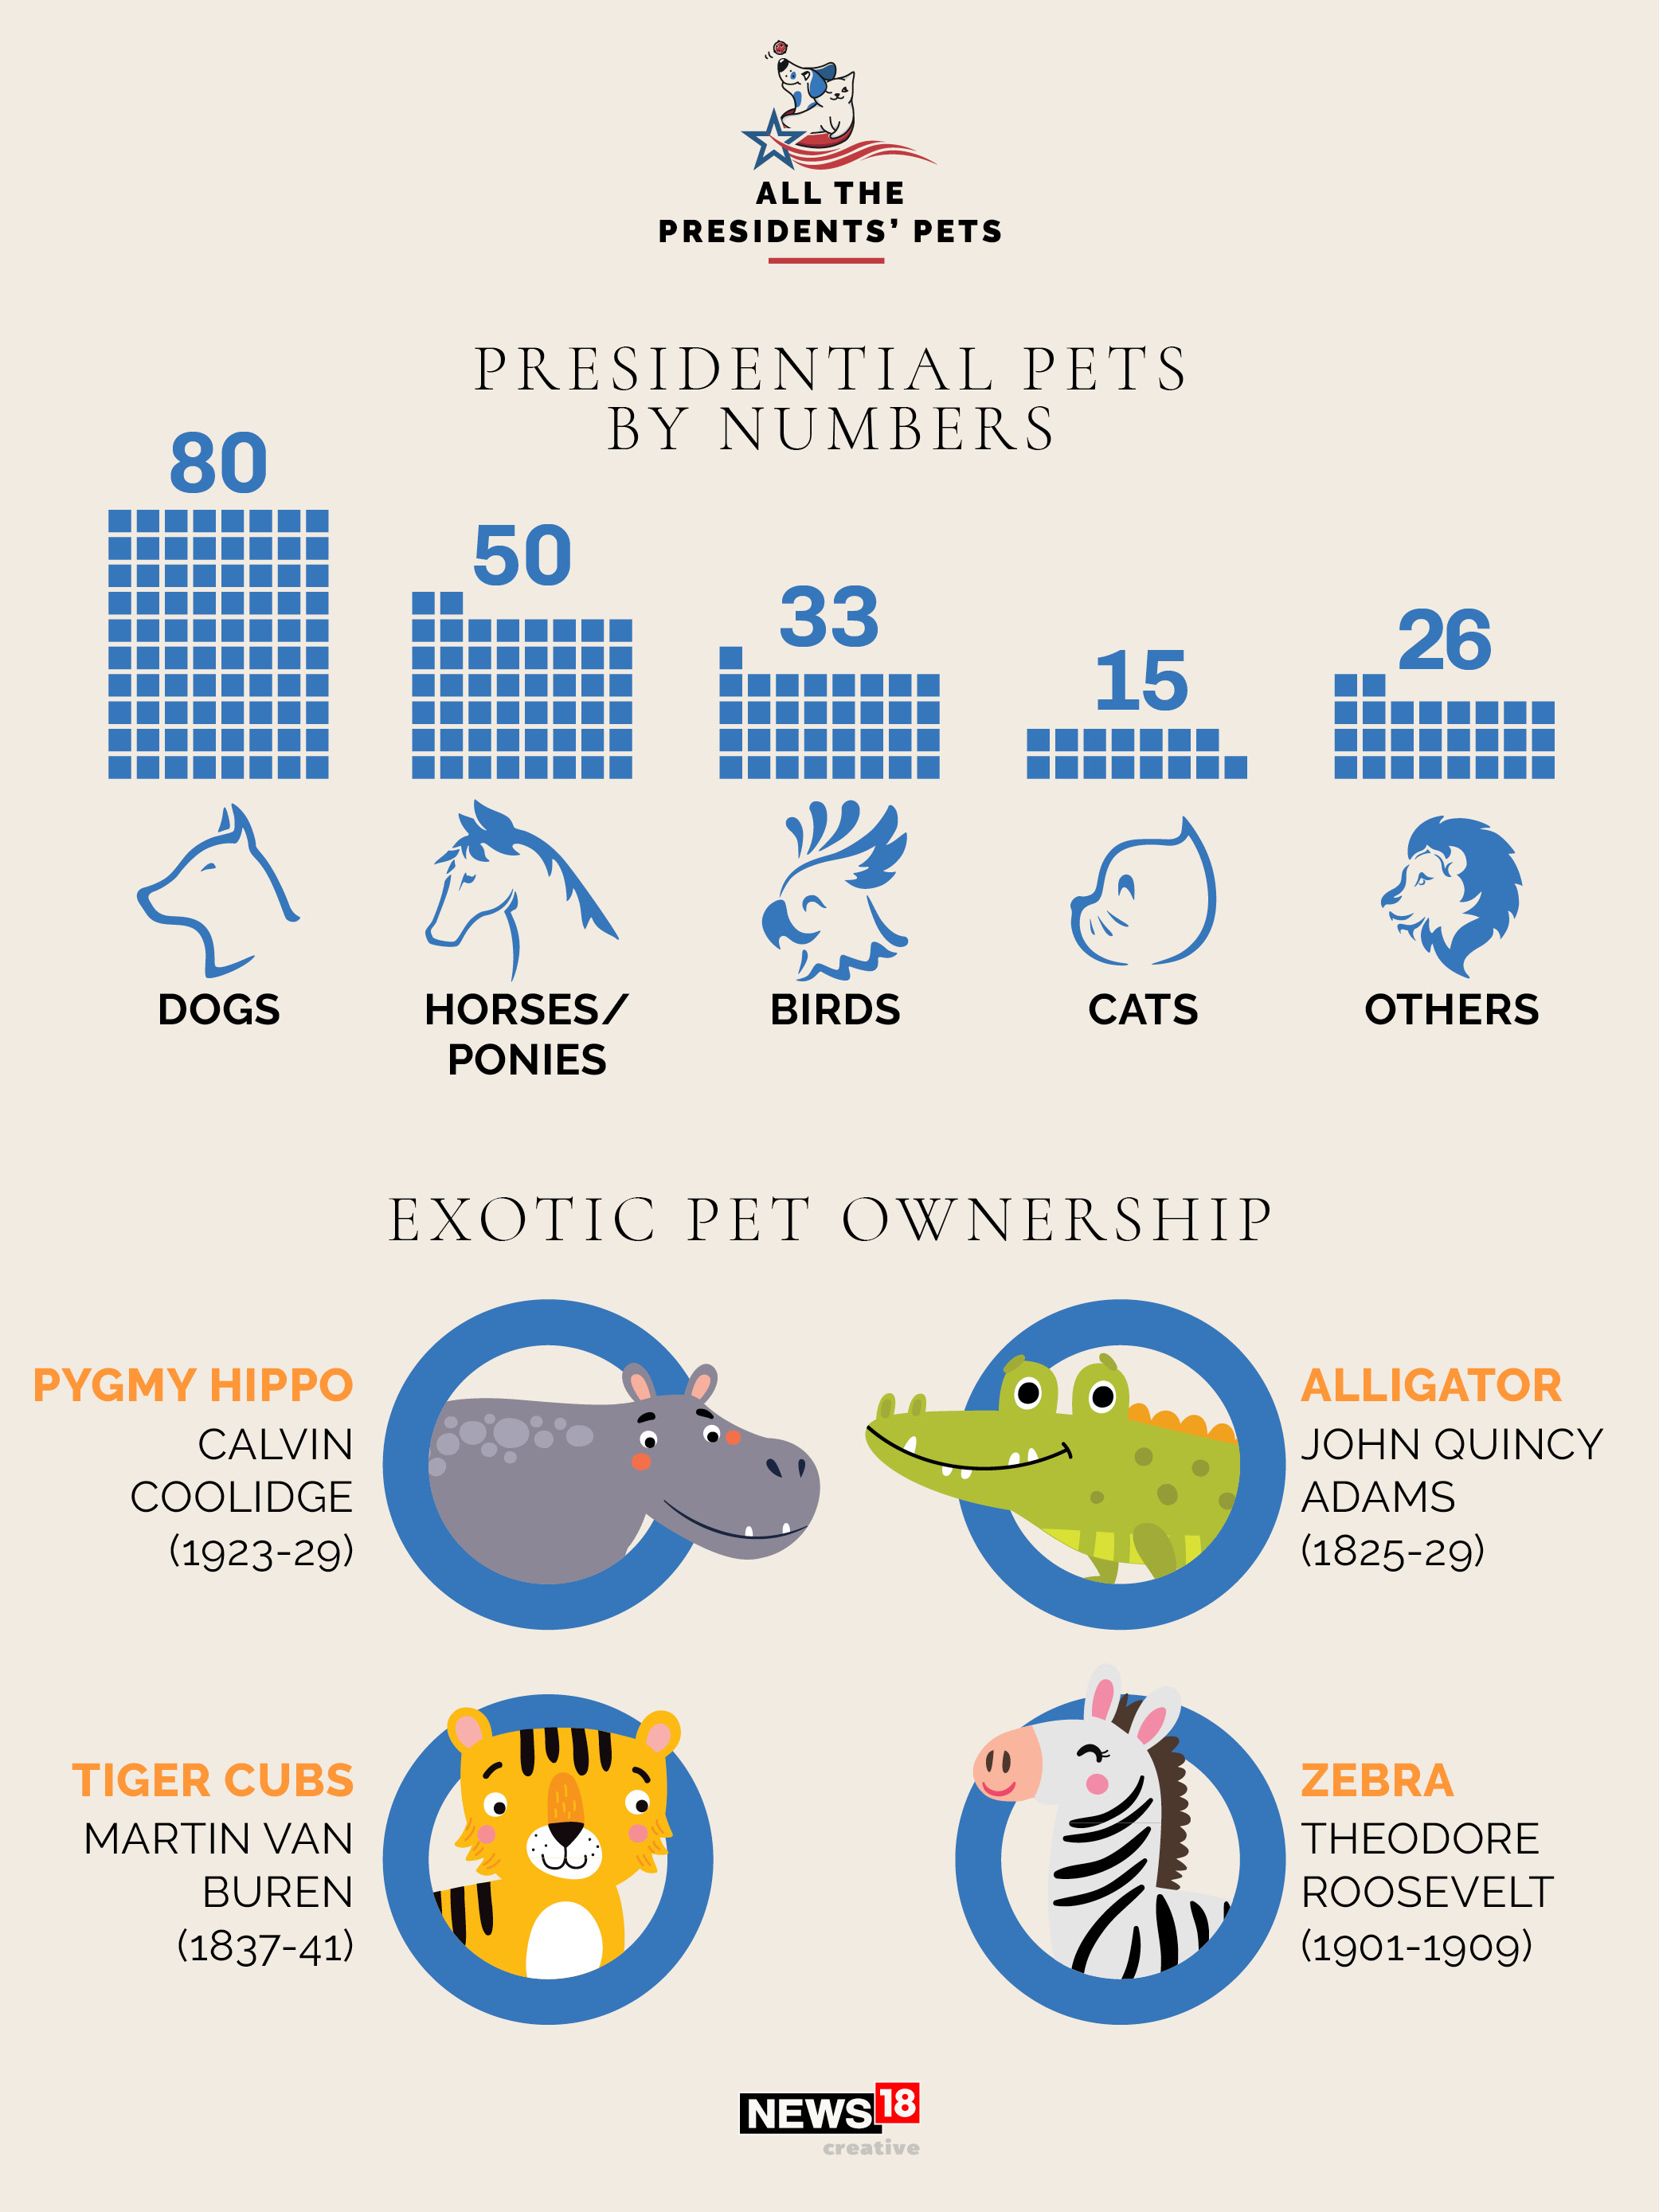 Champ, Major, and all the presidents' pets in US history